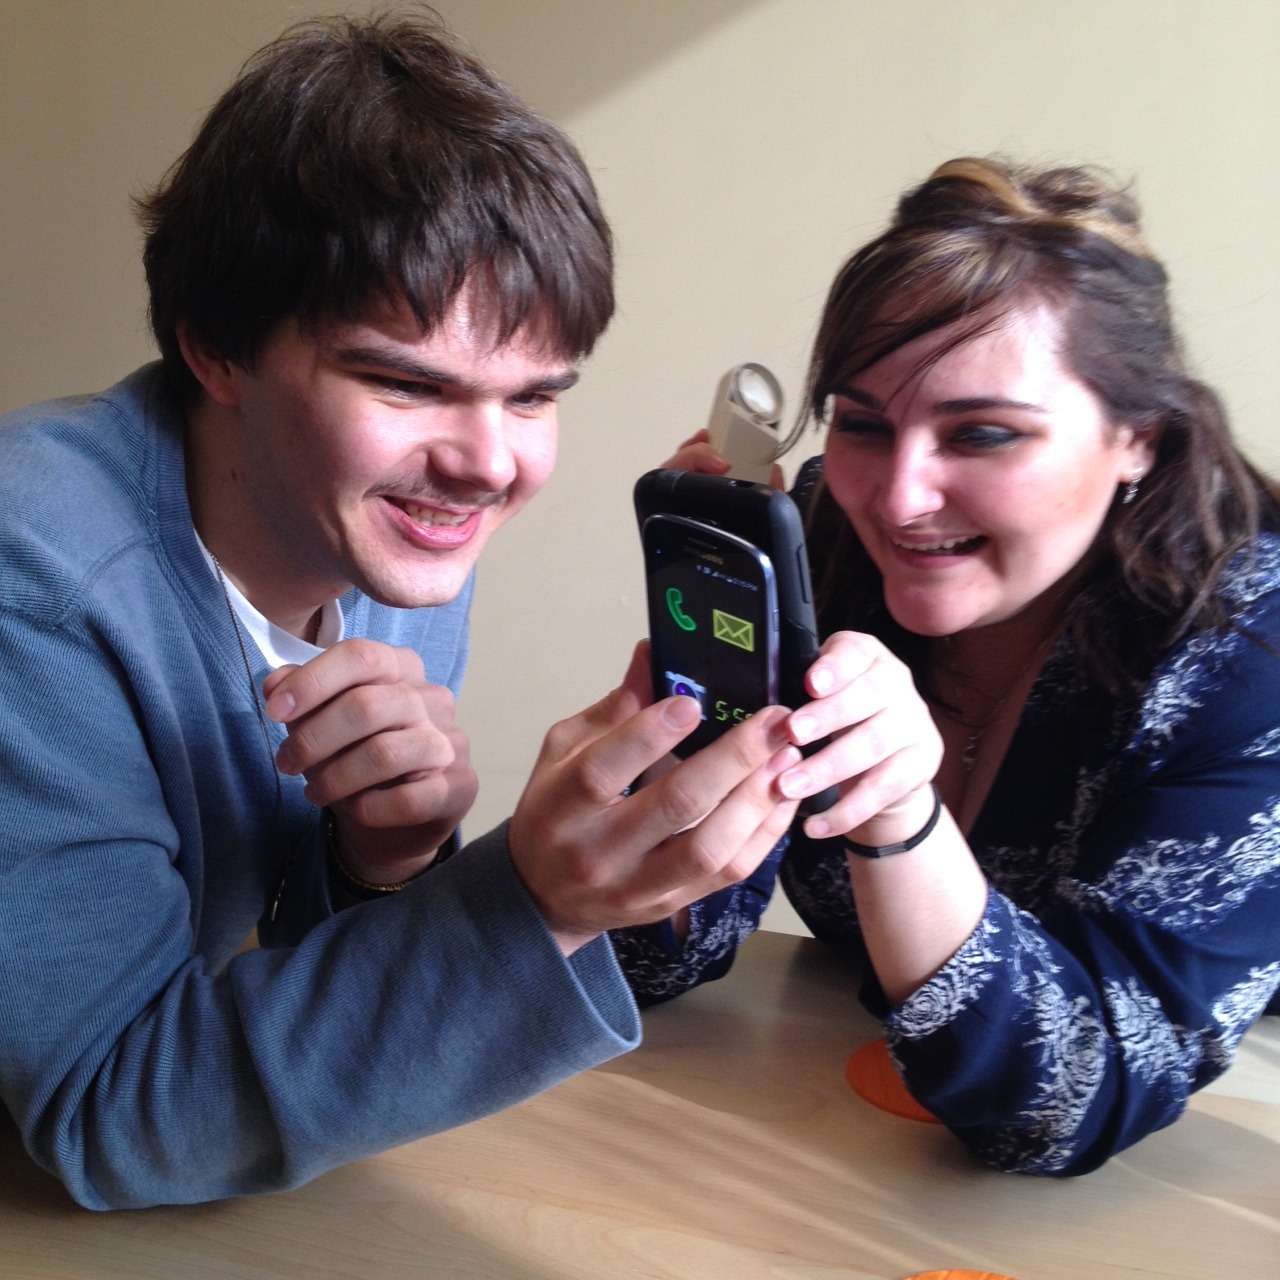 Two young people share photos on a smartphone